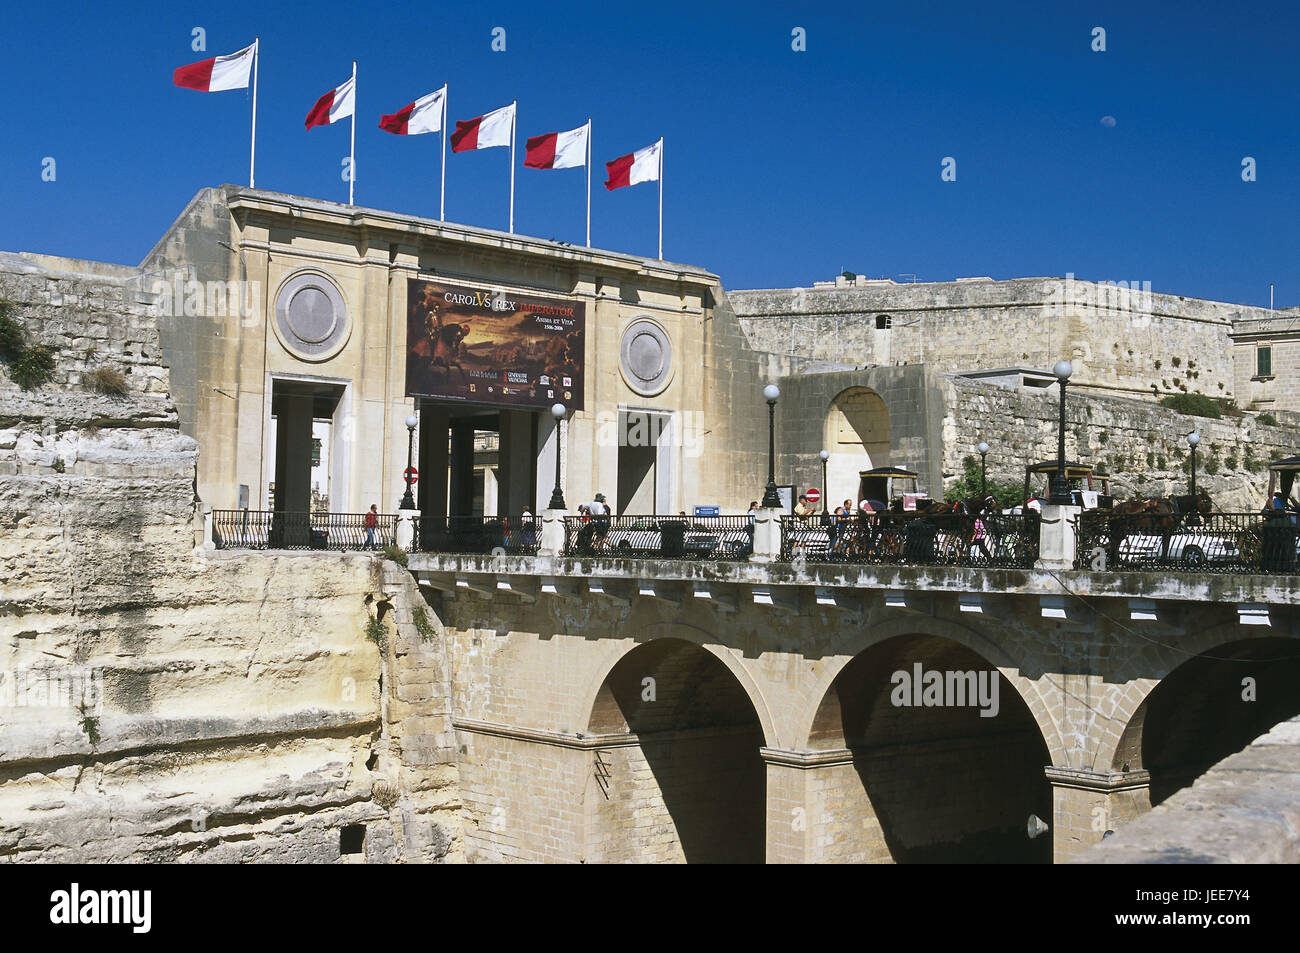 Island Malta, peninsula Sciberras, Valletta, city gates, bridge, traffic, passer-by, Maltese islands, Mediterranean island, capital, town, town view, UNESCO-world cultural heritage, structure, gate, builds in 1968, town gate, input, passage, access road, flags, stone bridge, moat, horse's carriages, cars, town traffic, place of interest, outside, Stock Photo